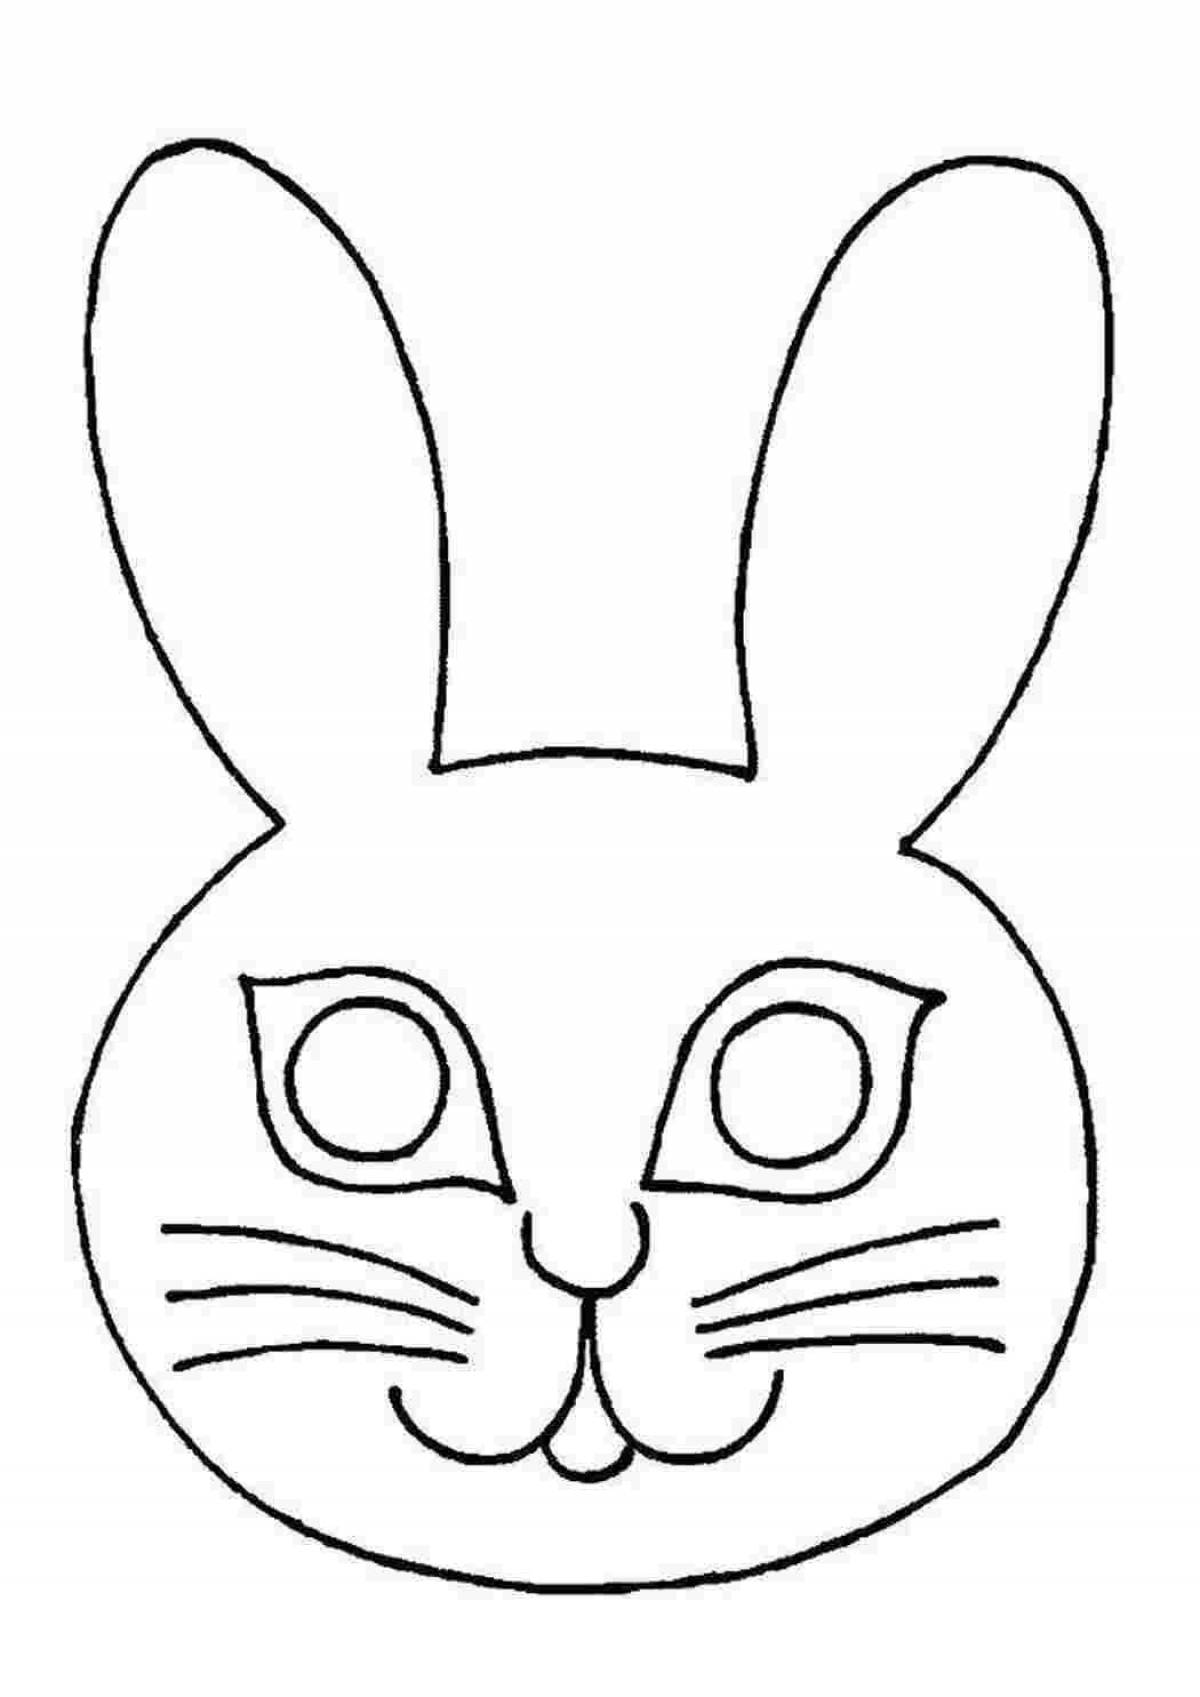 Coloring page charming muzzle of a hare